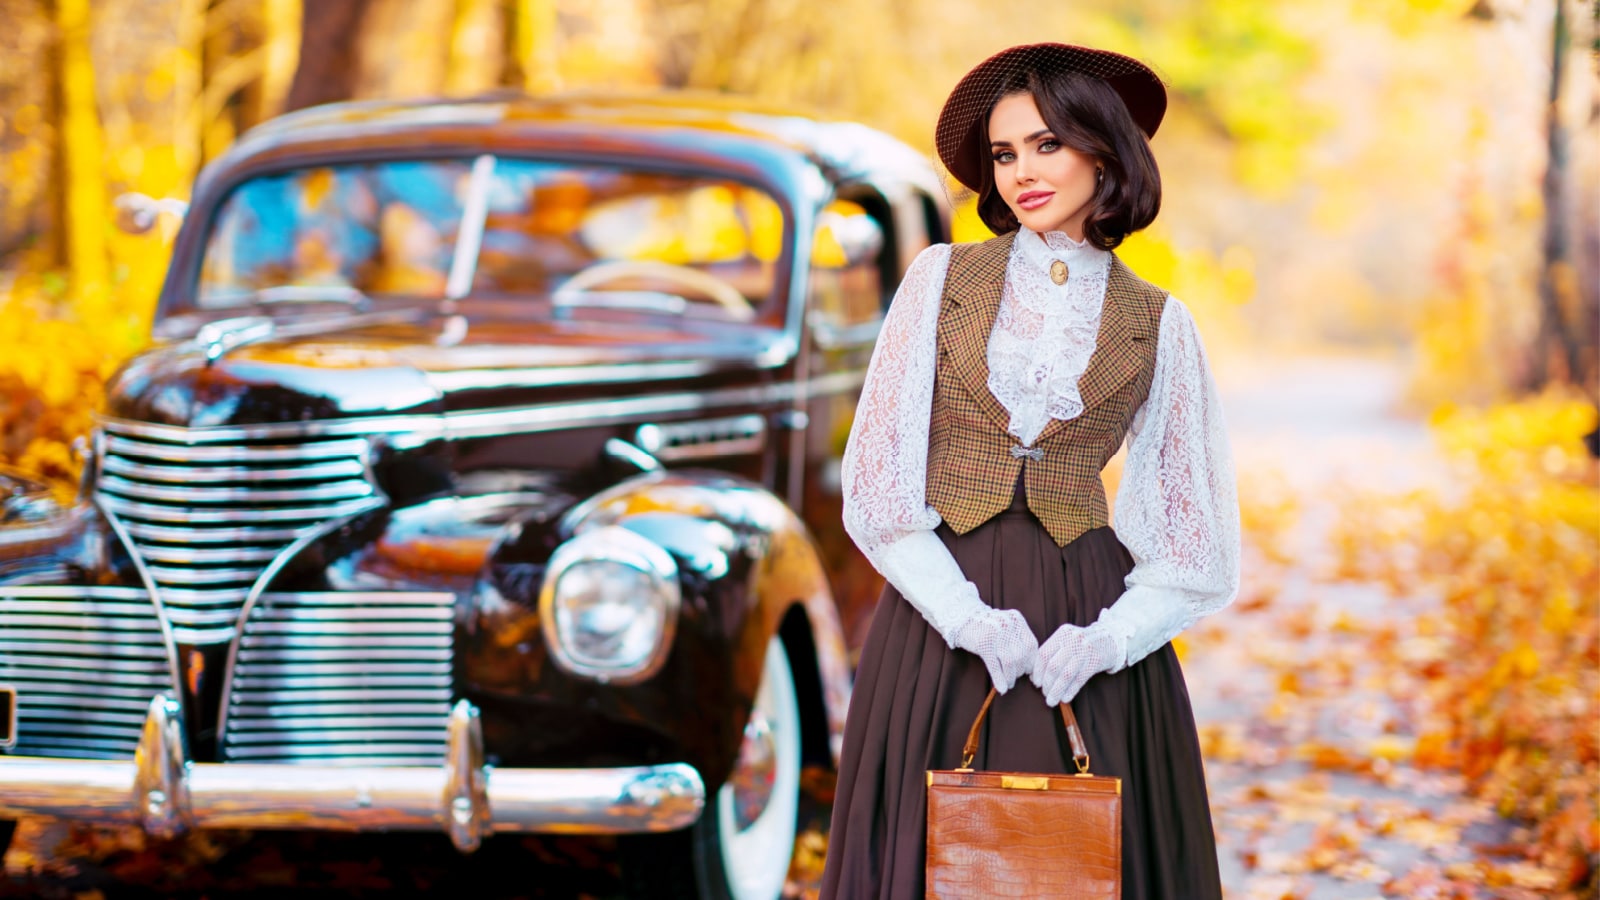 Beautiful female in vintage dress, lace blouse and hat with veil standing near retro brown car on autumn background. Elegant lady in gloves posing on nature.Warm art work.